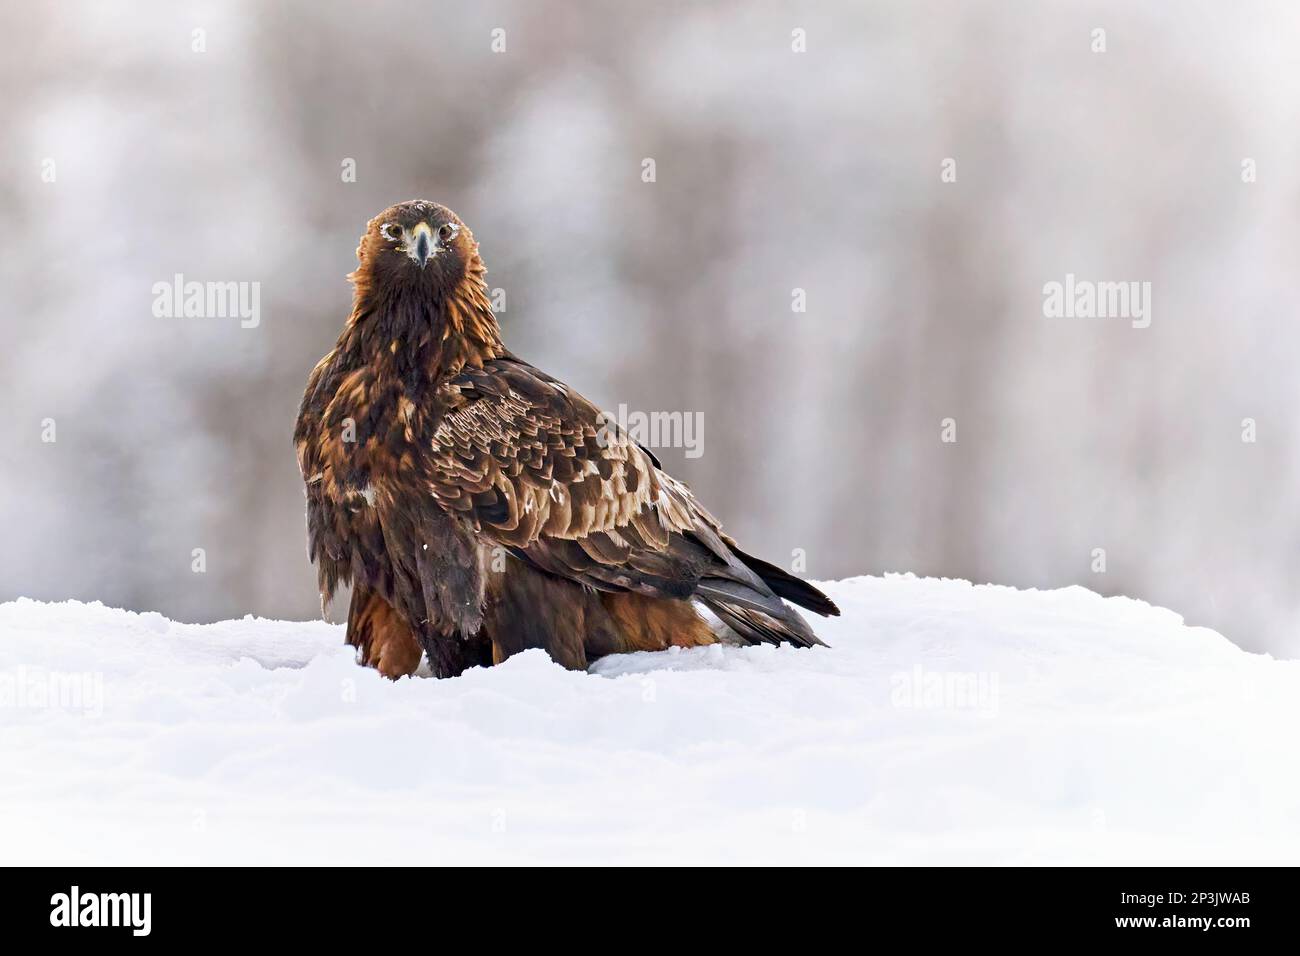 Golden eagle in its natural environment Stock Photo